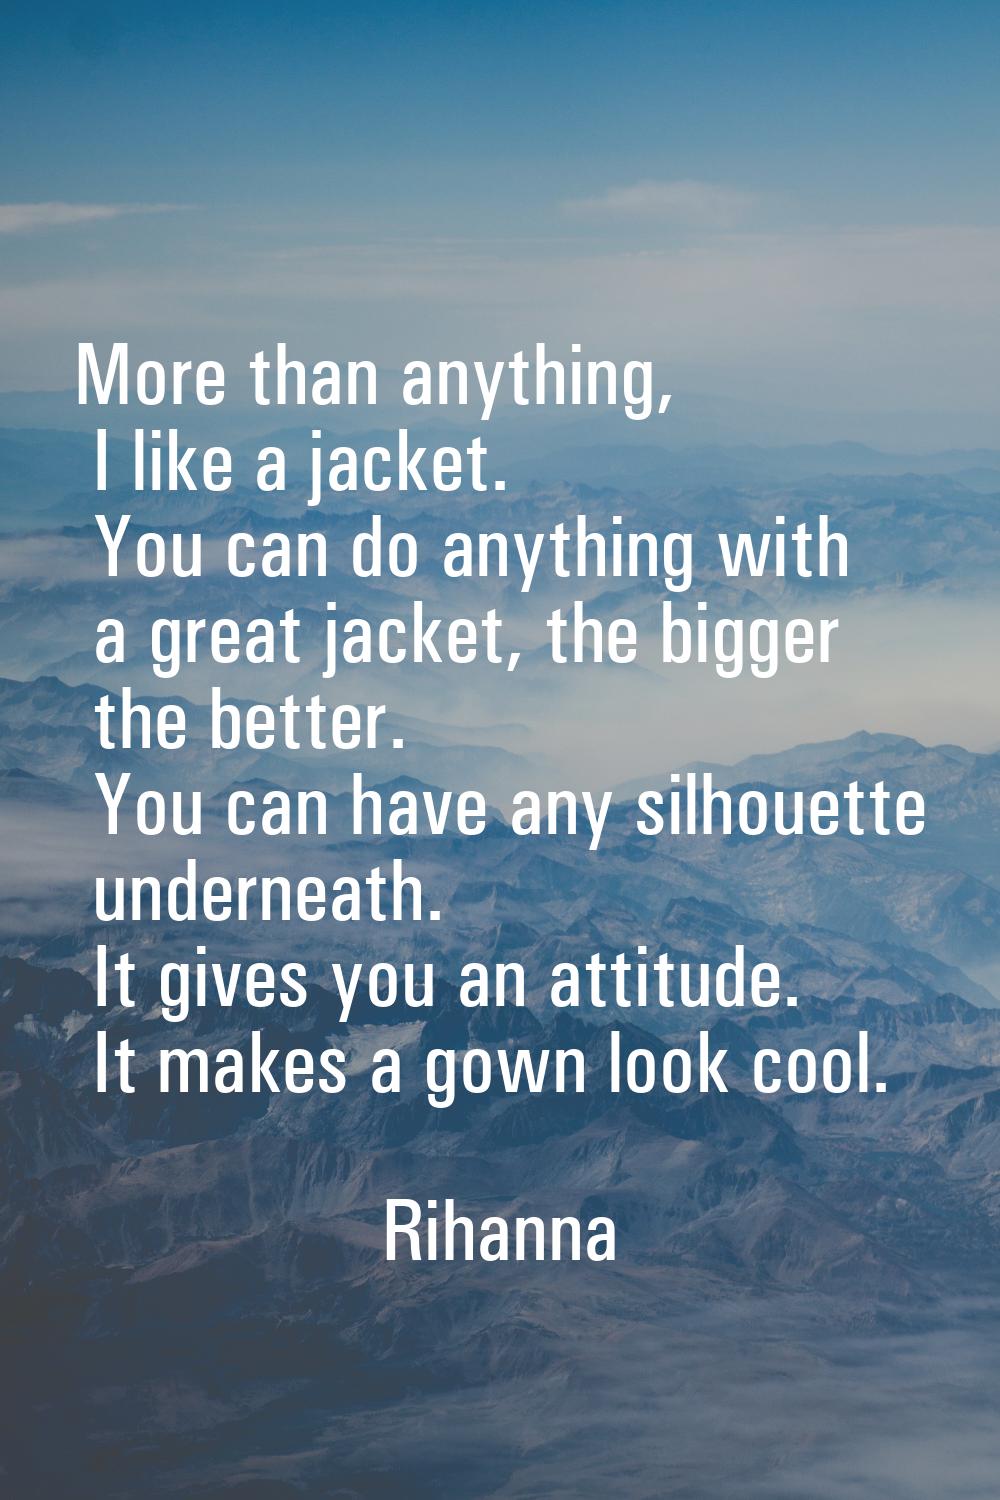 More than anything, I like a jacket. You can do anything with a great jacket, the bigger the better